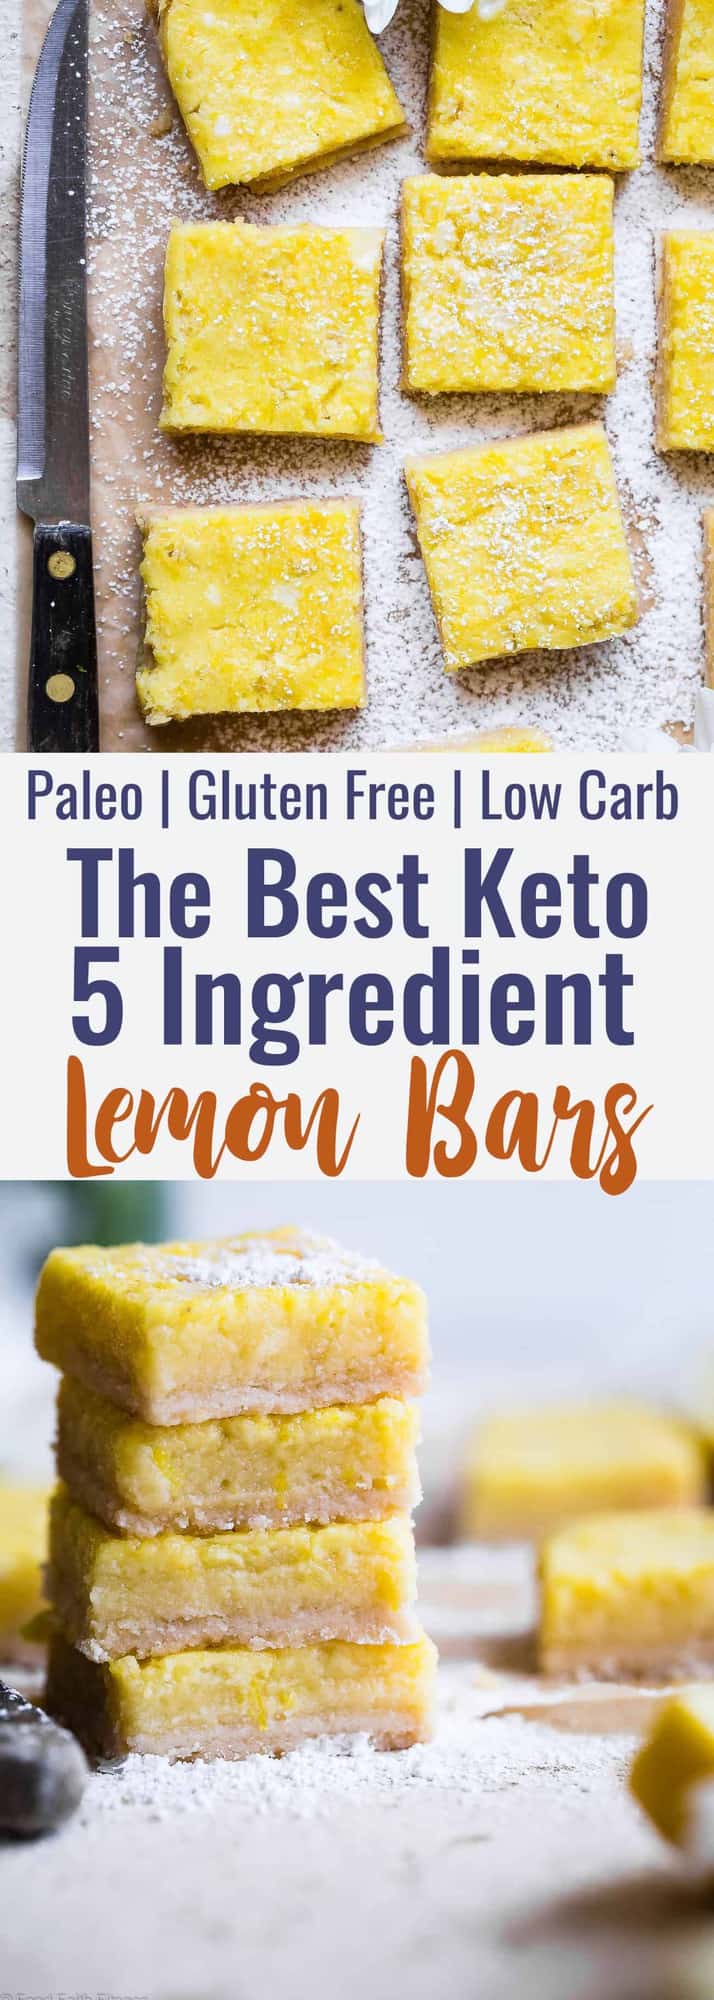 Keto Lemon Bars - These easy, gluten free lemon bars are only 5 ingredients and SO delicious! You will never believe they are only 100 calories, low carb and sugar free! | #Foodfaithfitness | #Glutenfree #Lowcarb #keto #sugarfree #healthy